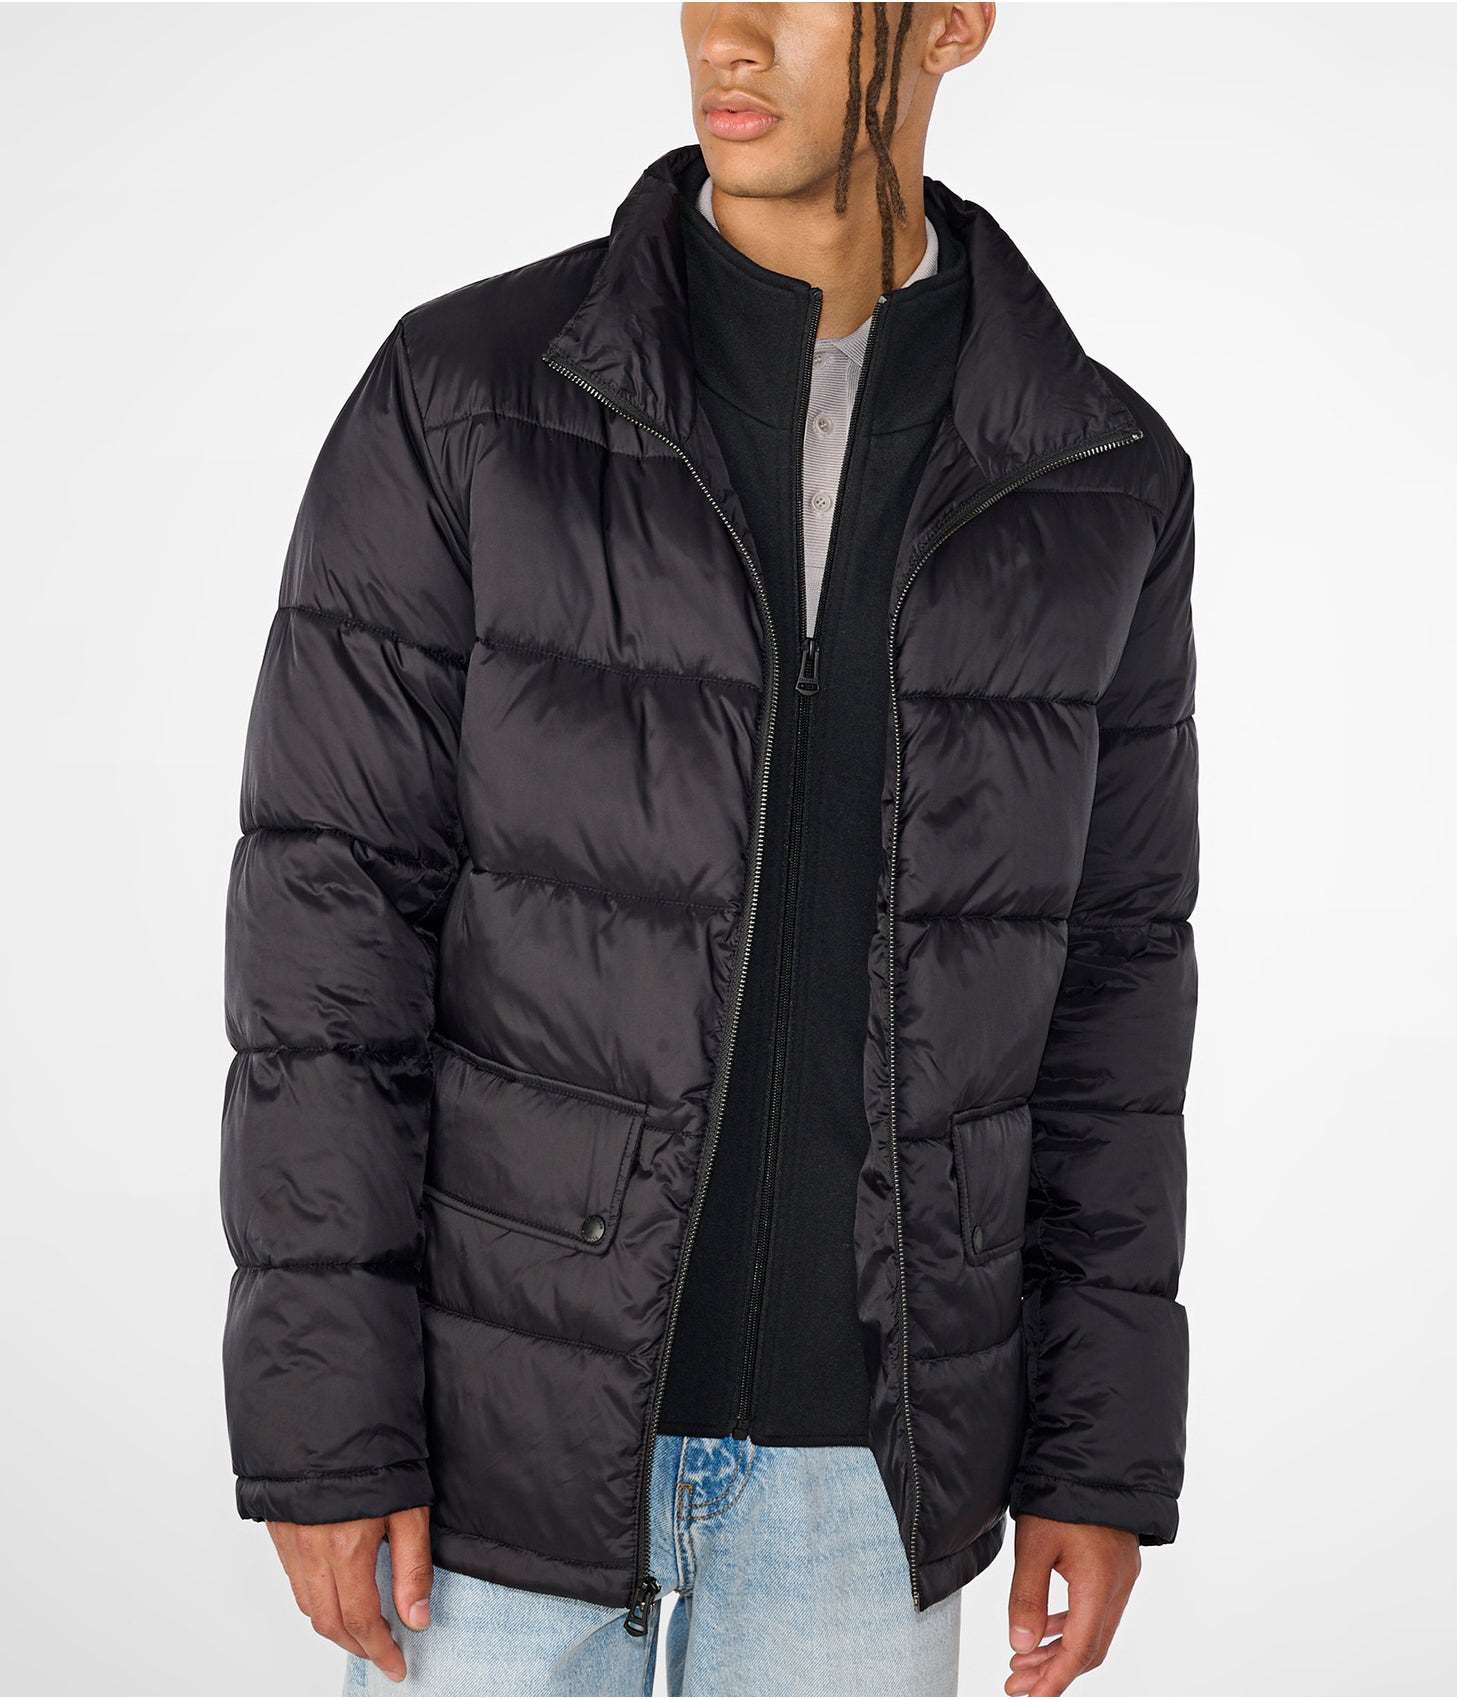 Men's Puffer Jacket In Black With Band Collar